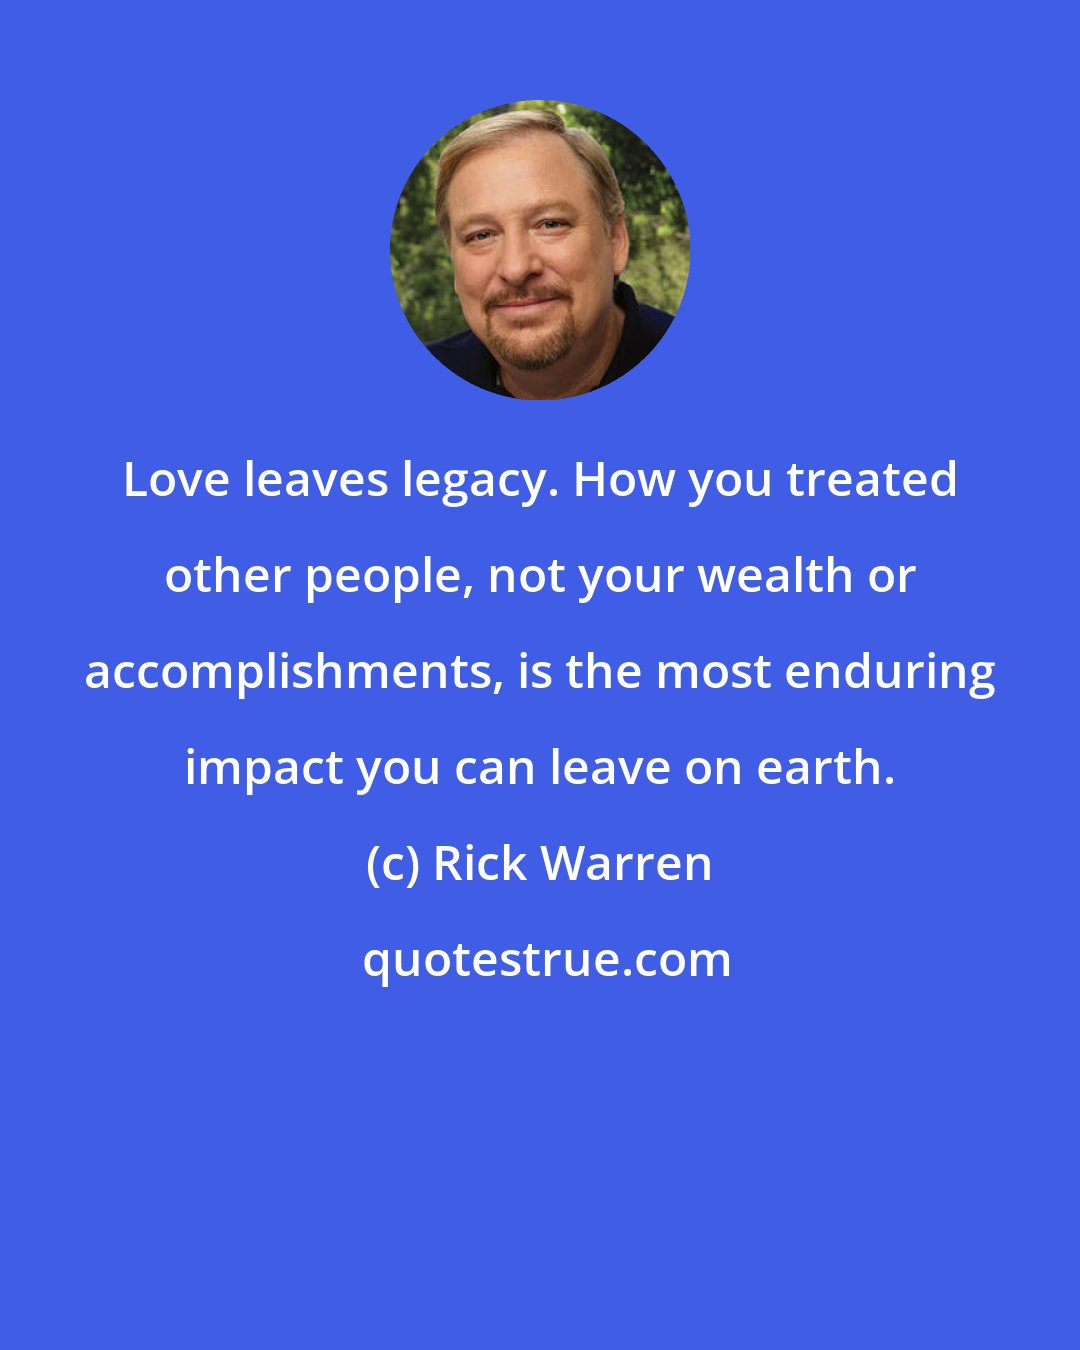 Rick Warren: Love leaves legacy. How you treated other people, not your wealth or accomplishments, is the most enduring impact you can leave on earth.